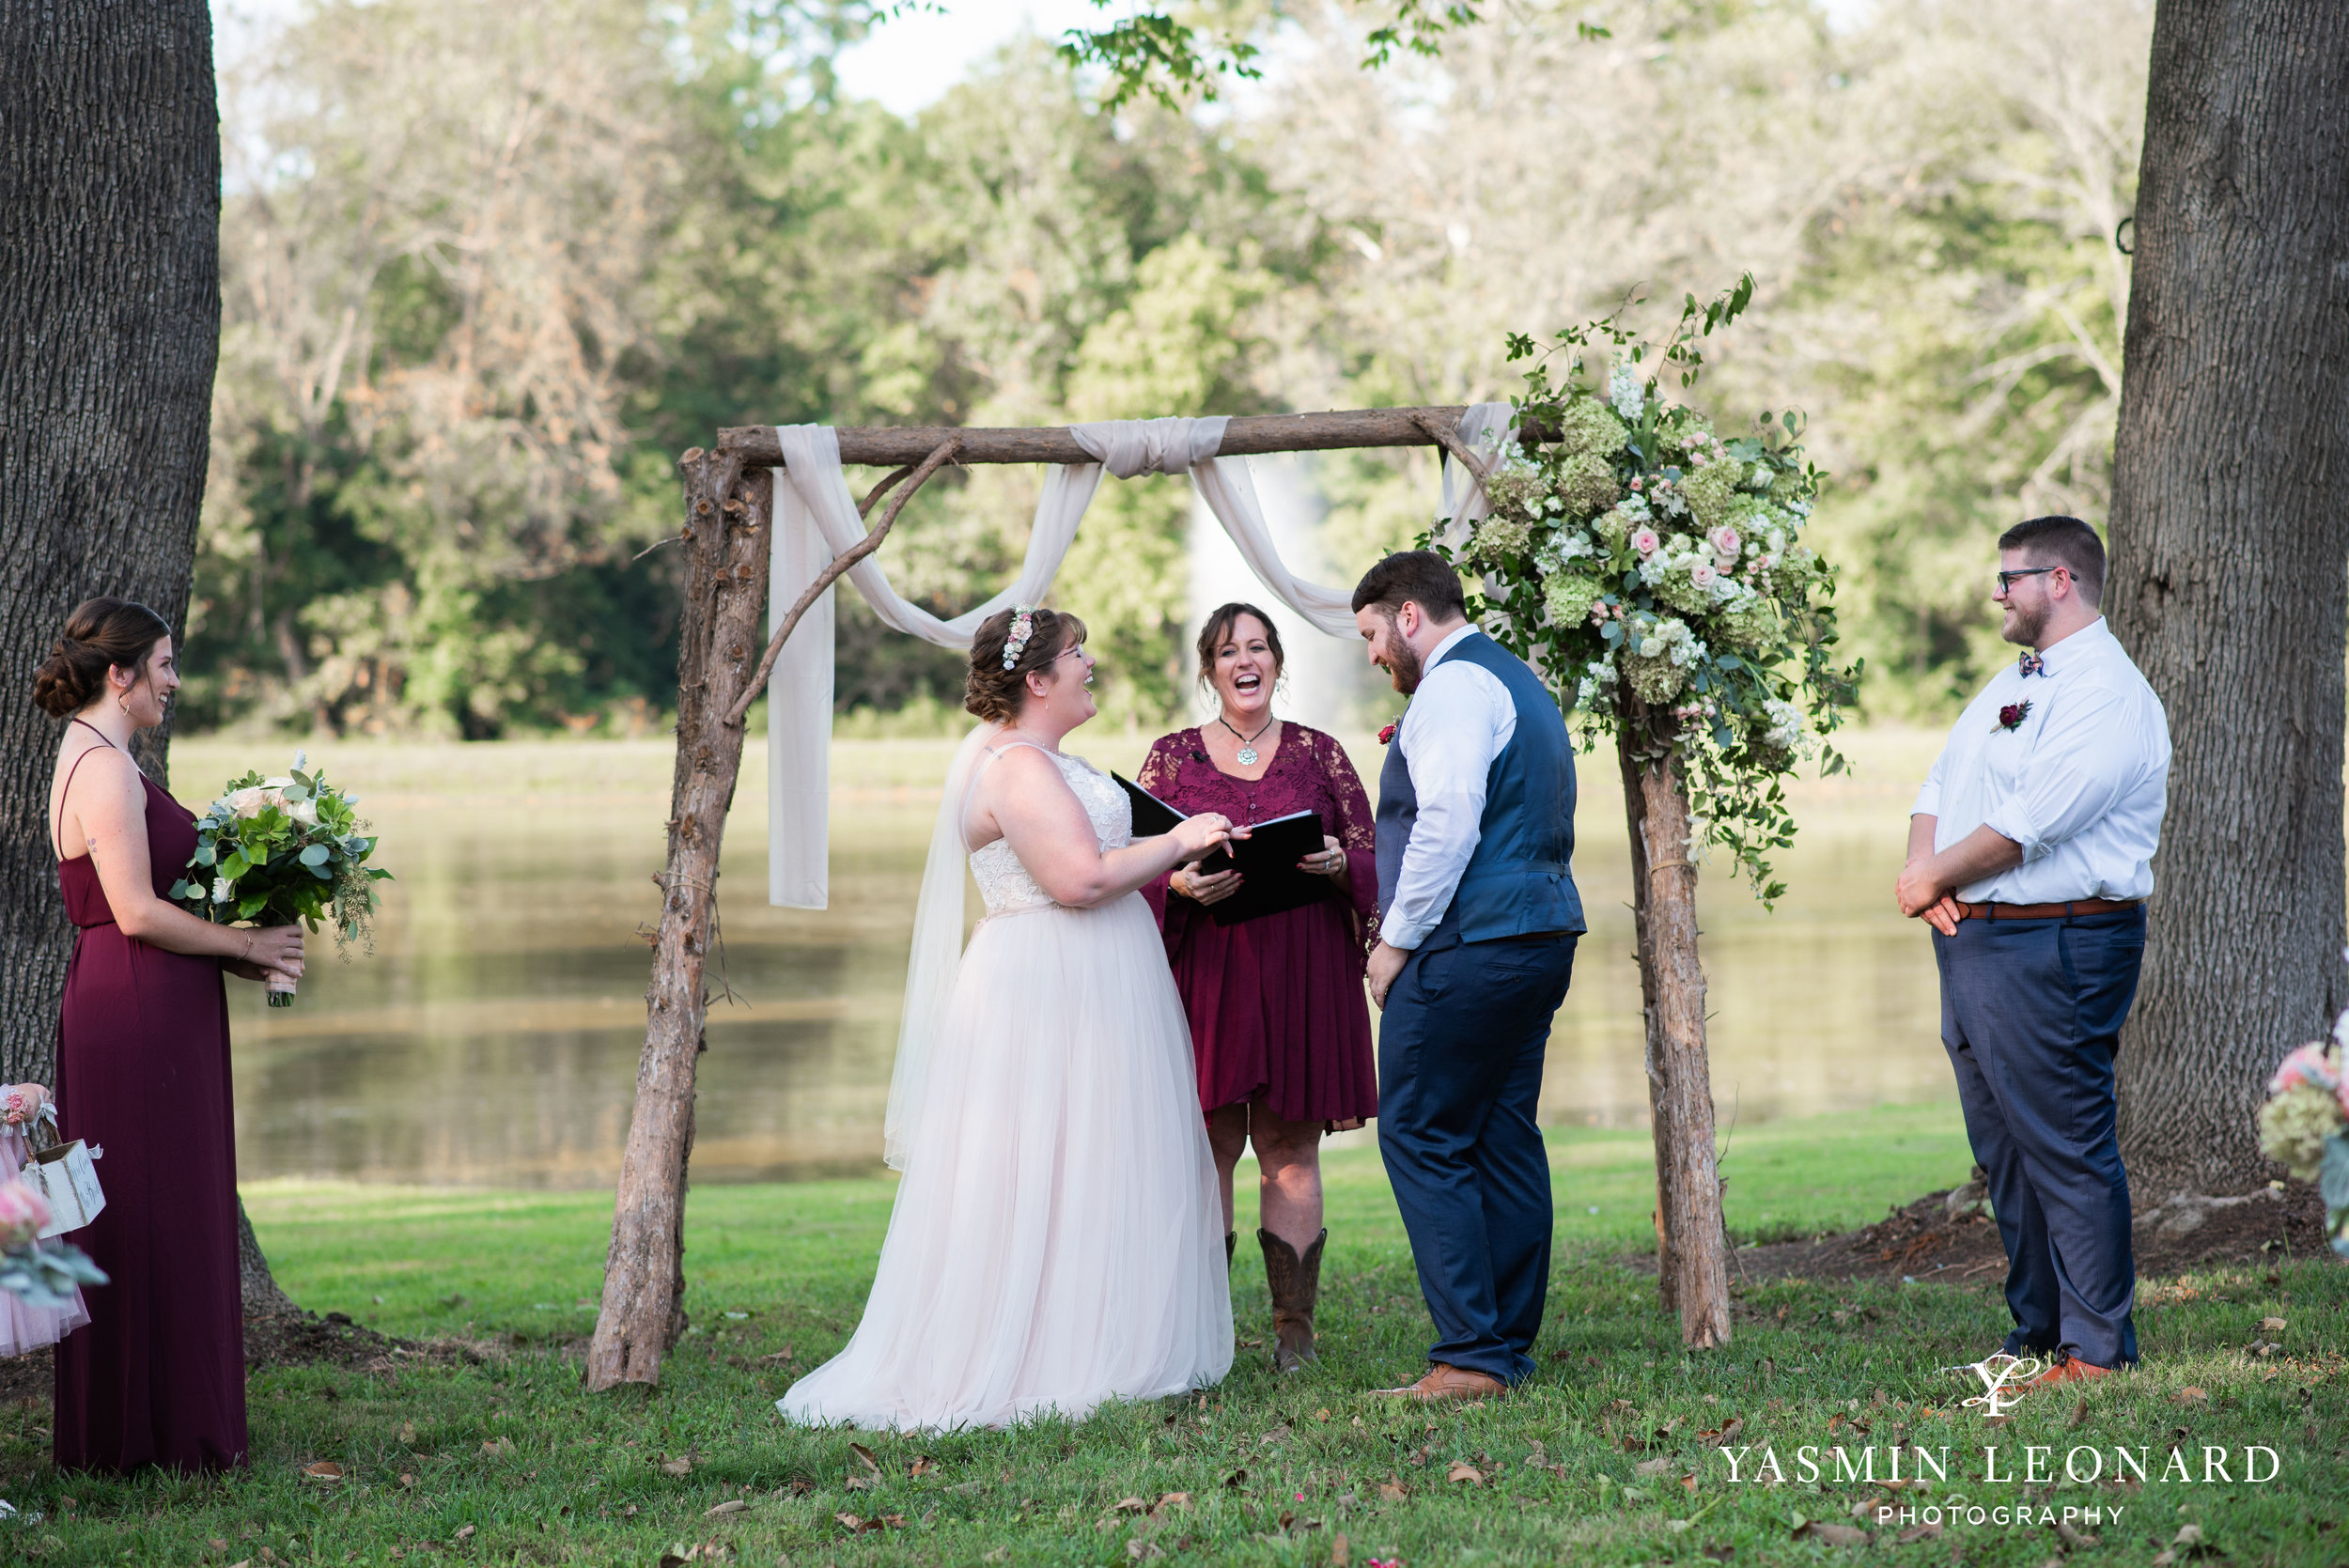 Hannah and David - l'abri at Linwood - NC Barn Weddings - Guys and Girls on Bride's Side - How to incorporate guys with bridesmaids - navy fall wedding - high point photographer - nc wedding venues - triad weddings-28.jpg